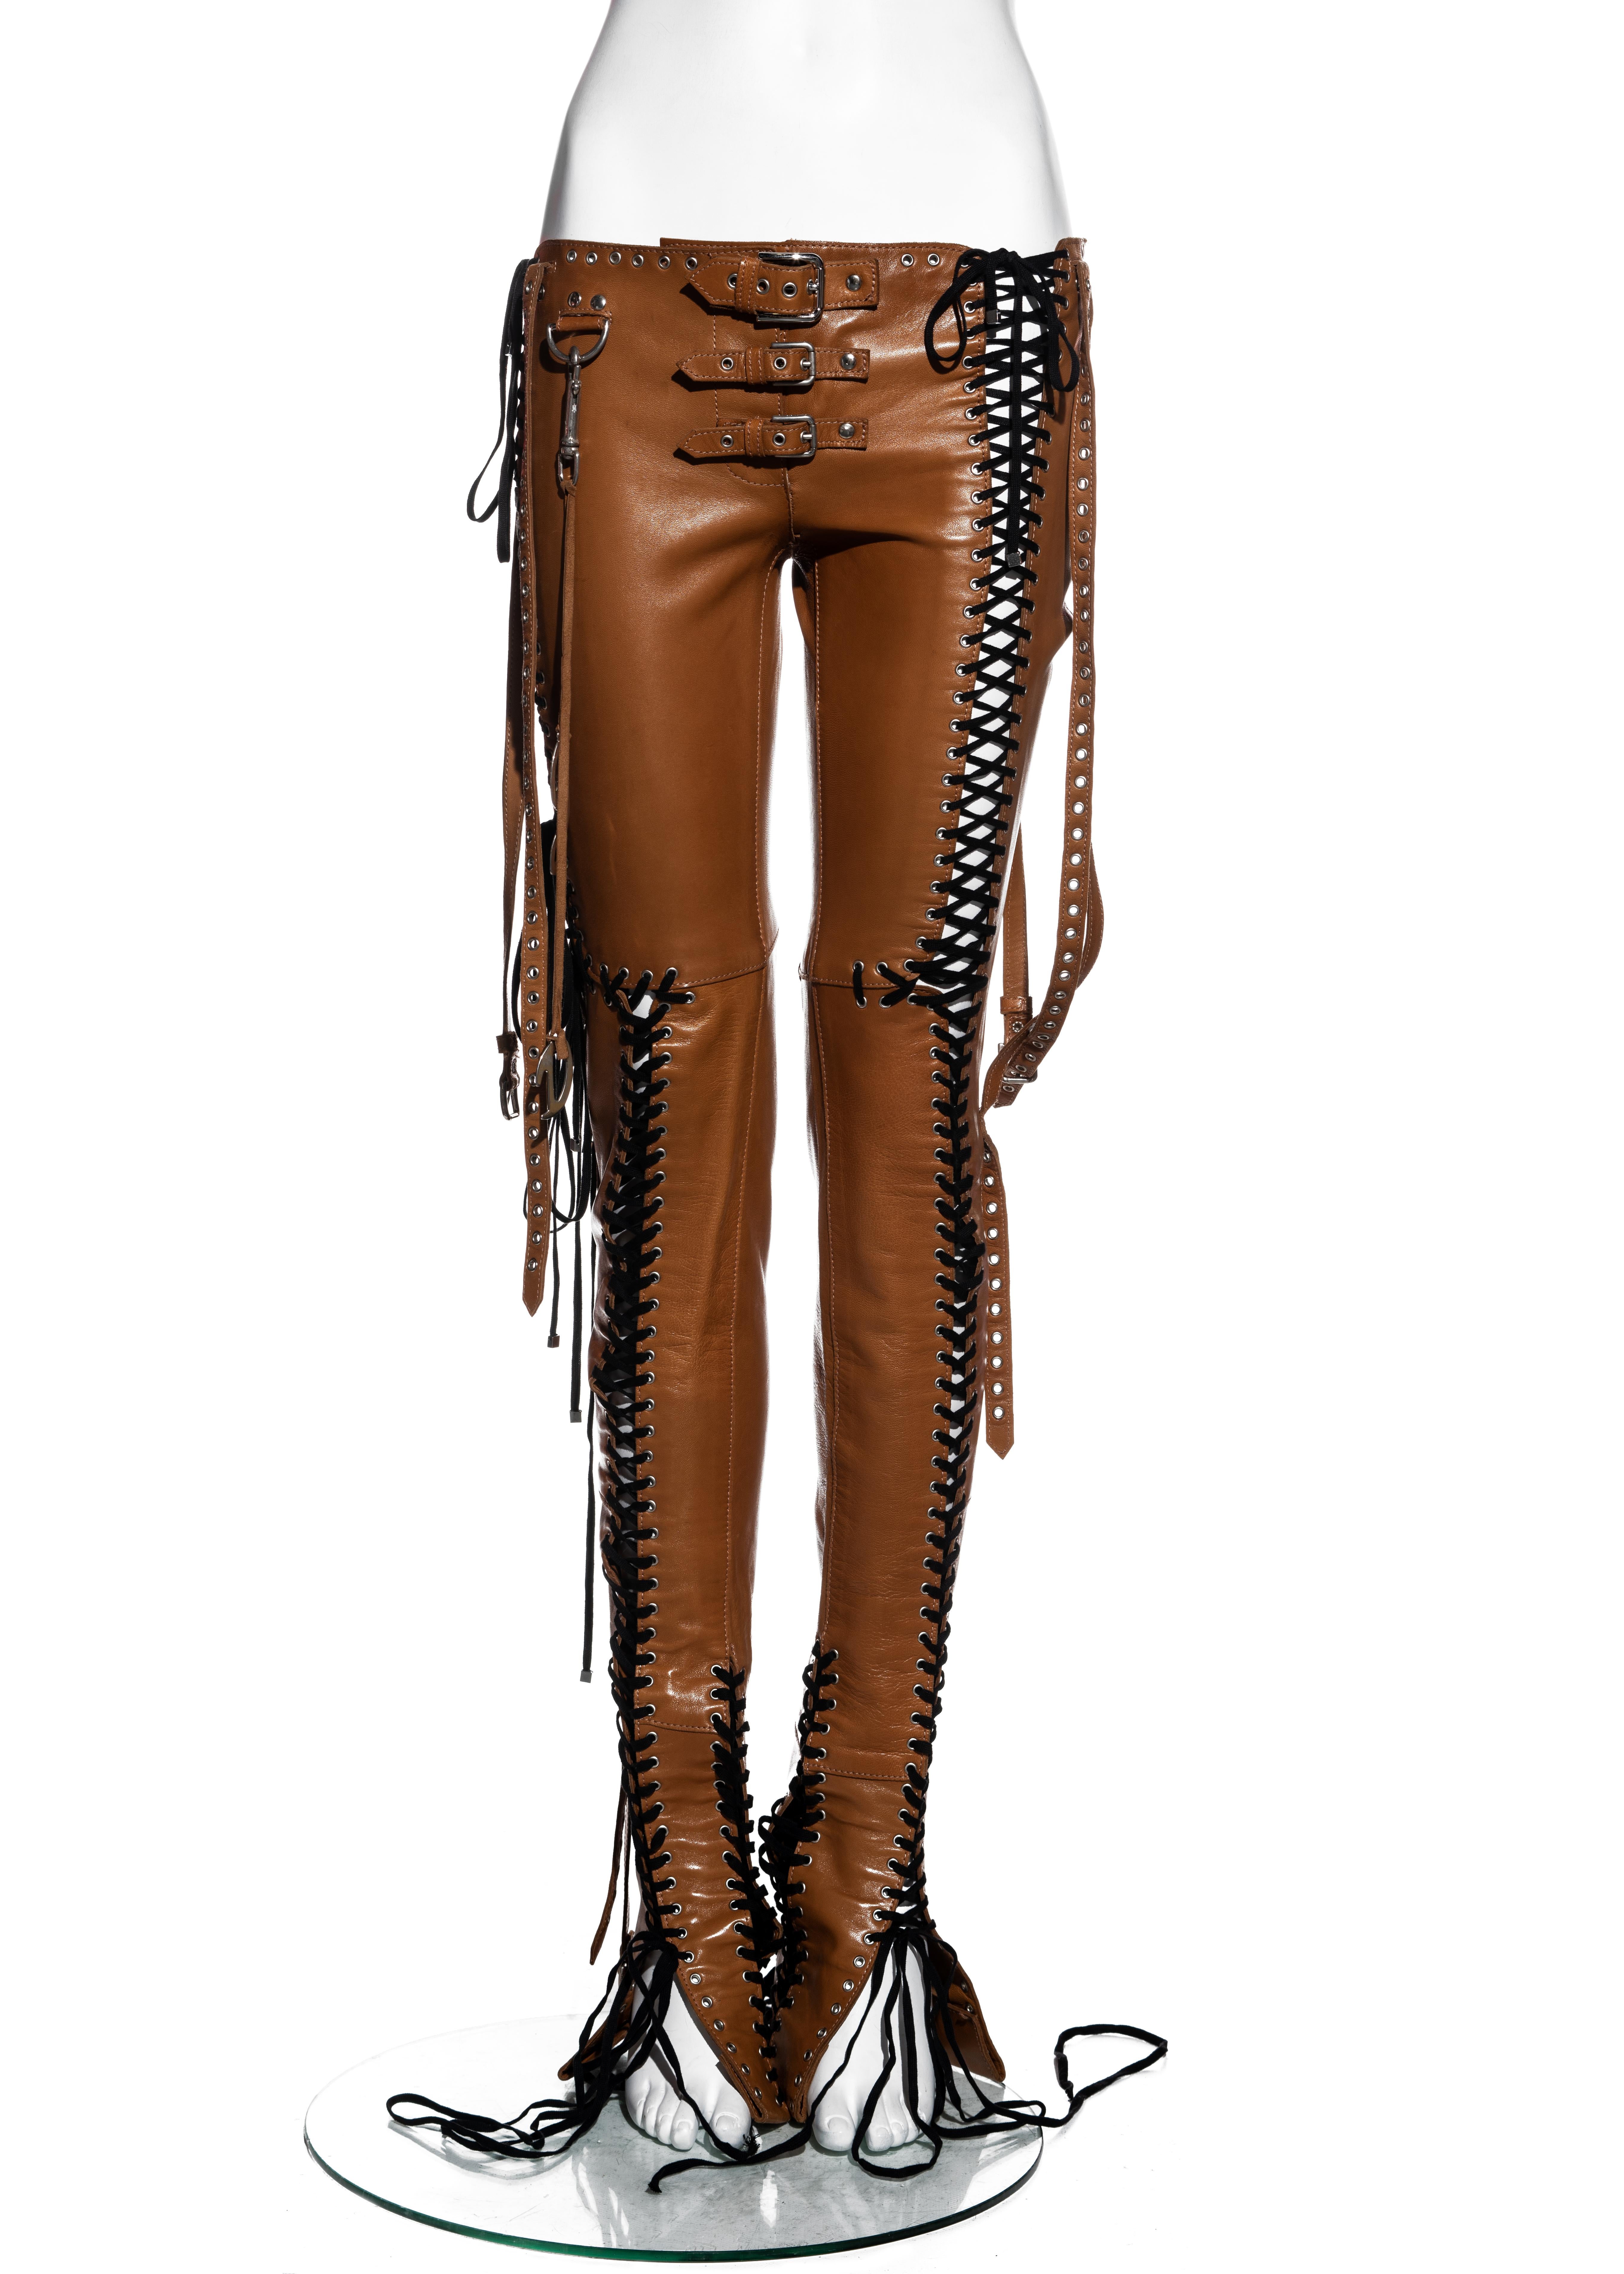 ▪ Dolce & Gabbana tan leather pants 
▪ 100% Sheepskin leather 
▪ Metal grommets 
▪ Multiple black lace-up fastenings 
▪ Three buckles at waist 
▪ Four long belt straps hanging from hips 
▪ Hanging metal 'D' and 'G' detail 
▪ Size IT 38 - FR 34 - UK